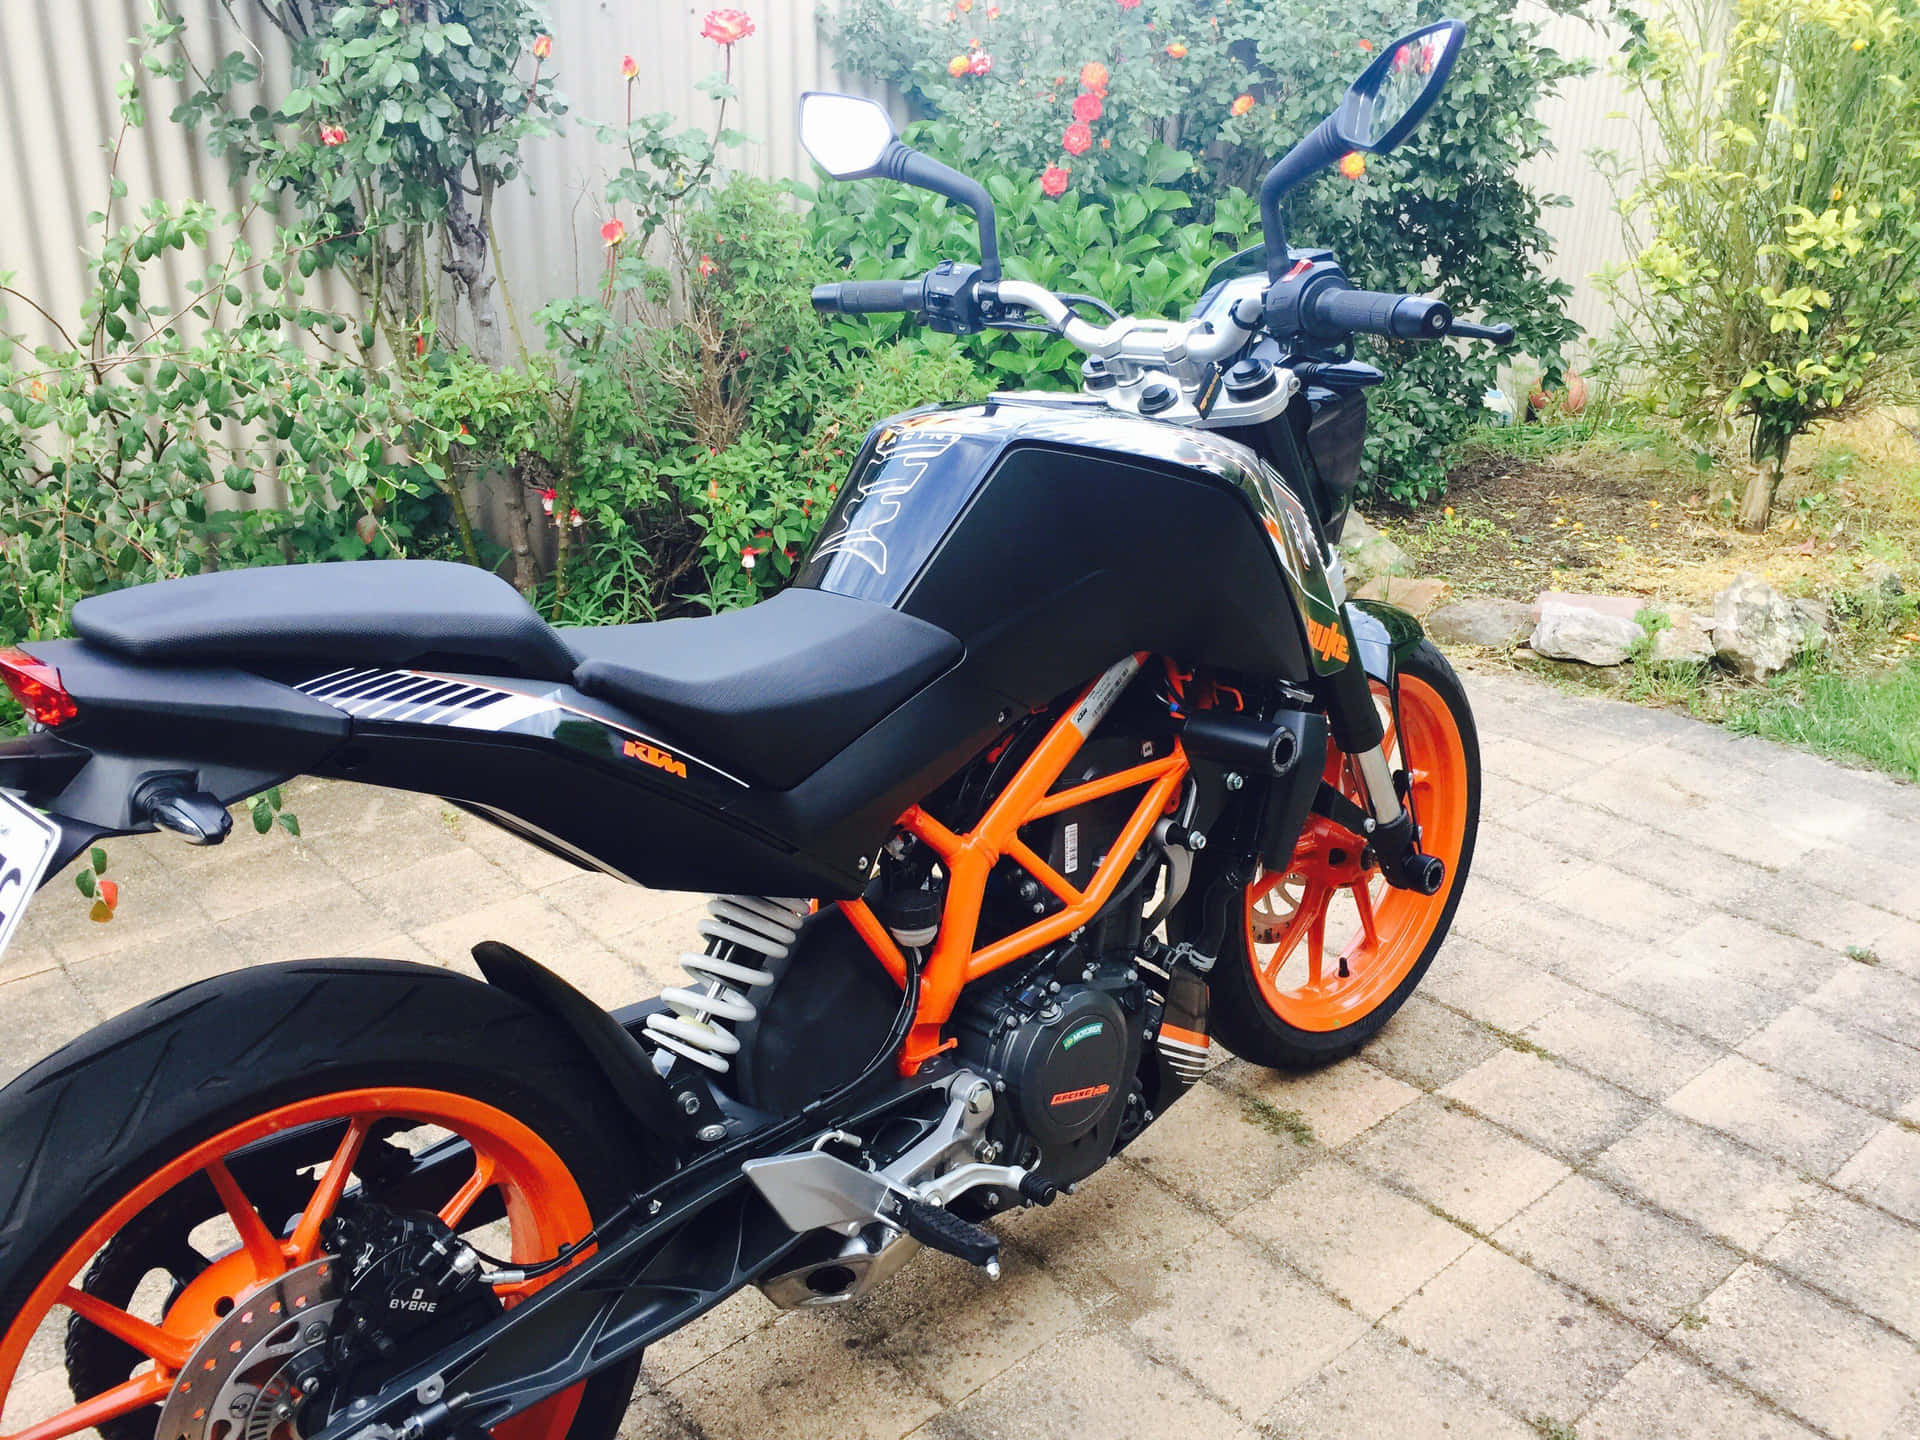 Get Ready To Take The Ride On A Powerful KTM Duke 390